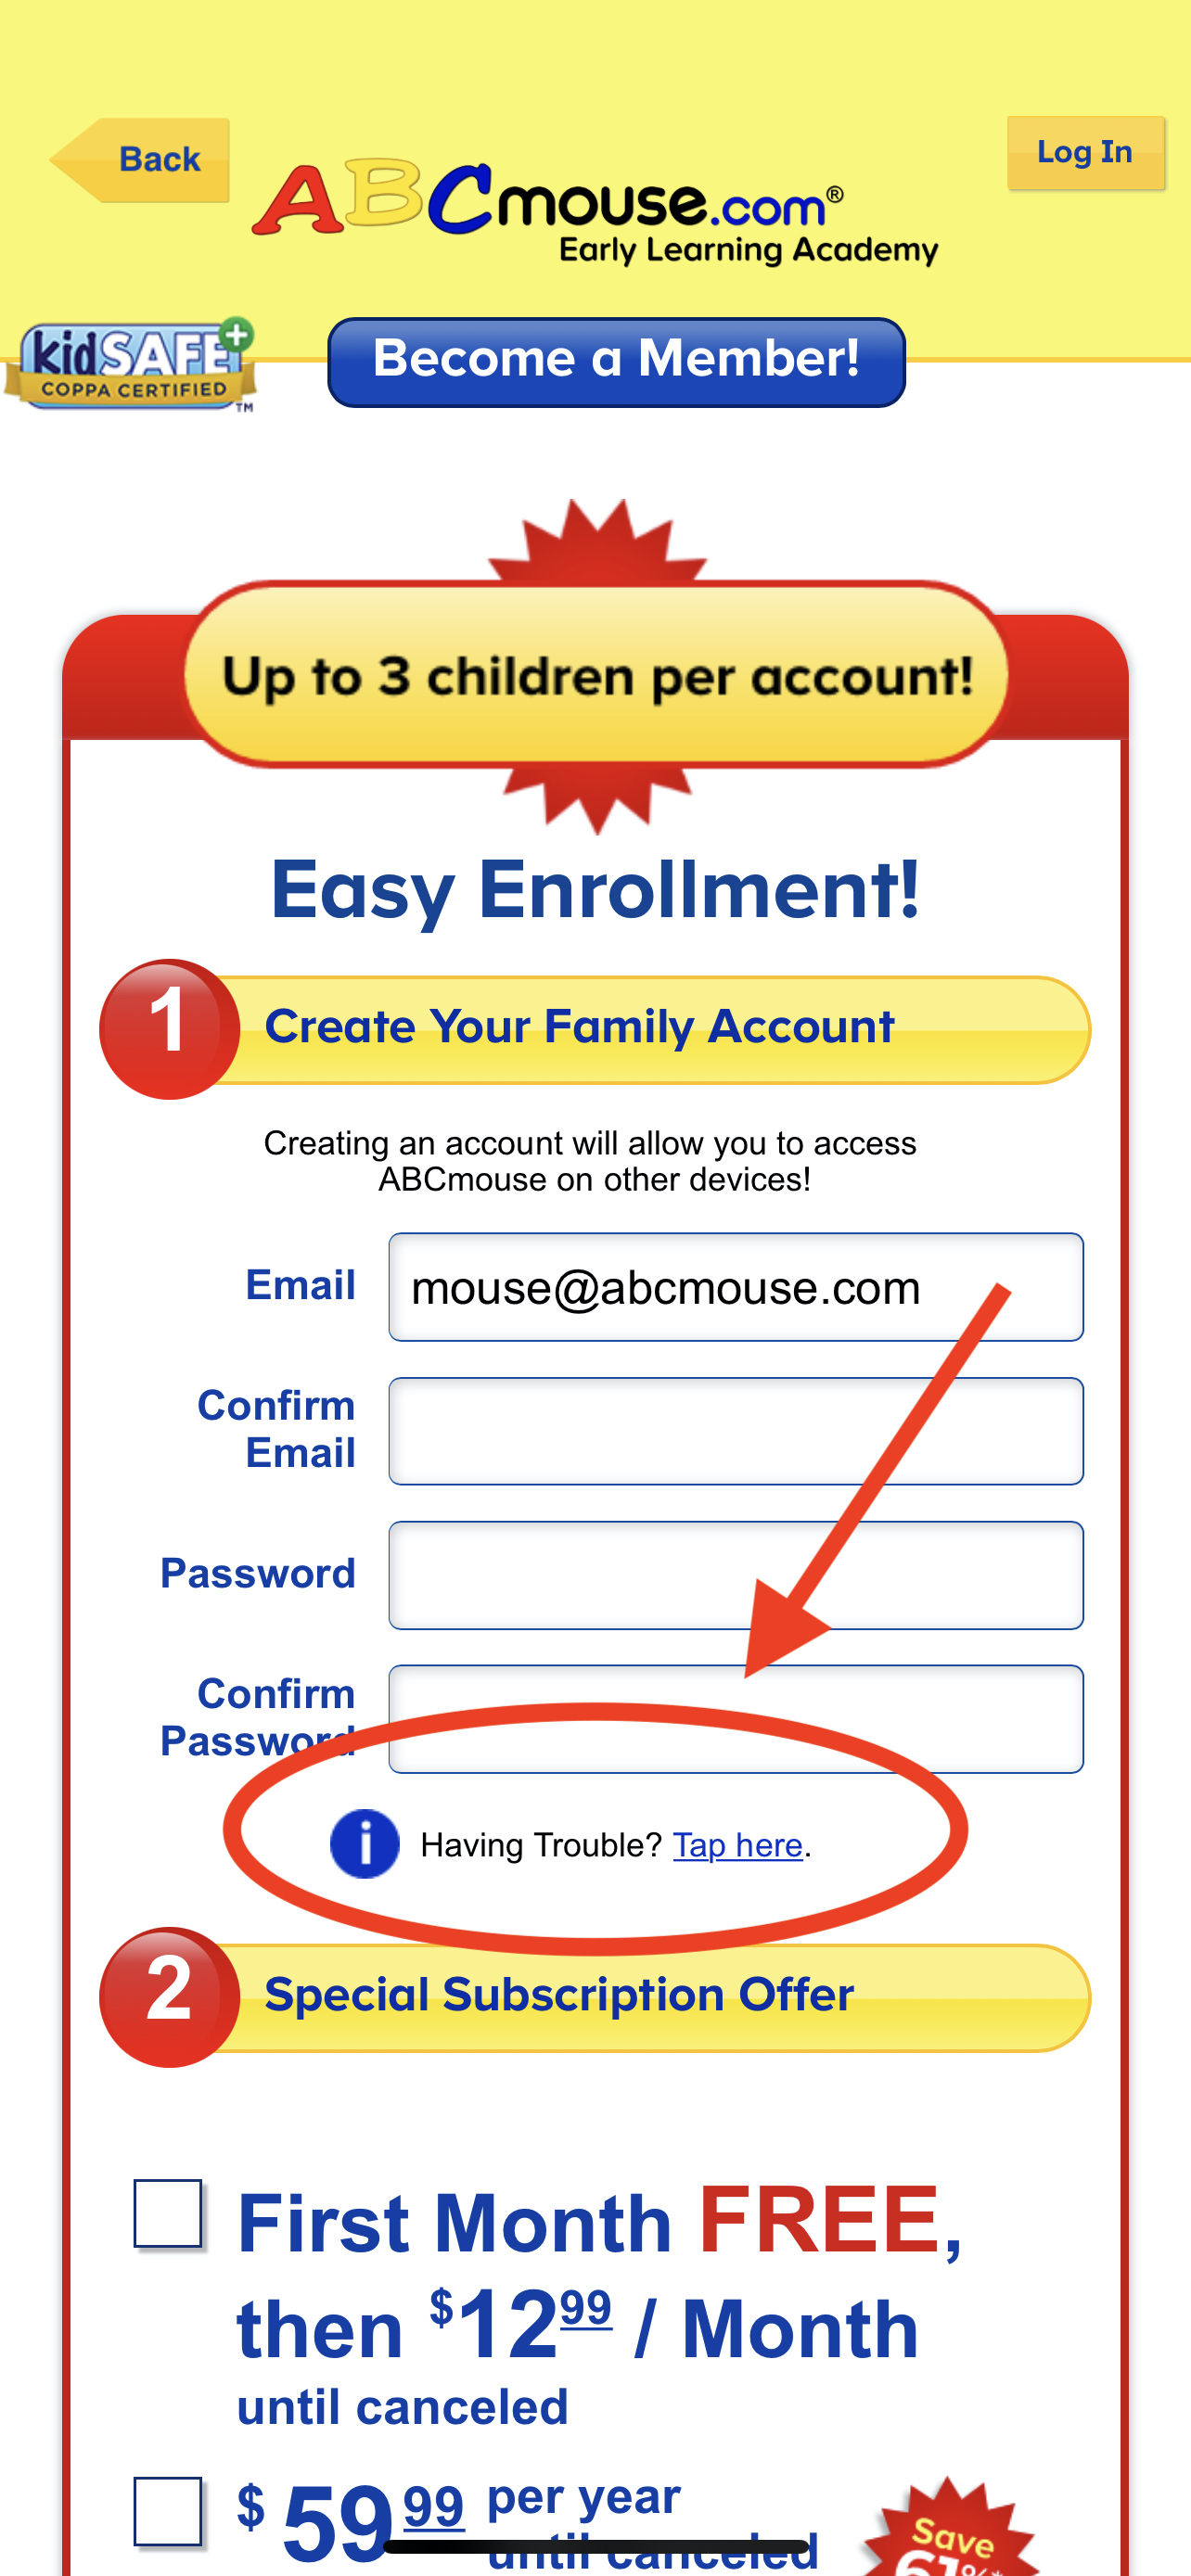 Monica bunker Duke How do I restore my subscription through Amazon or Apple (iTunes)? –  ABCmouse